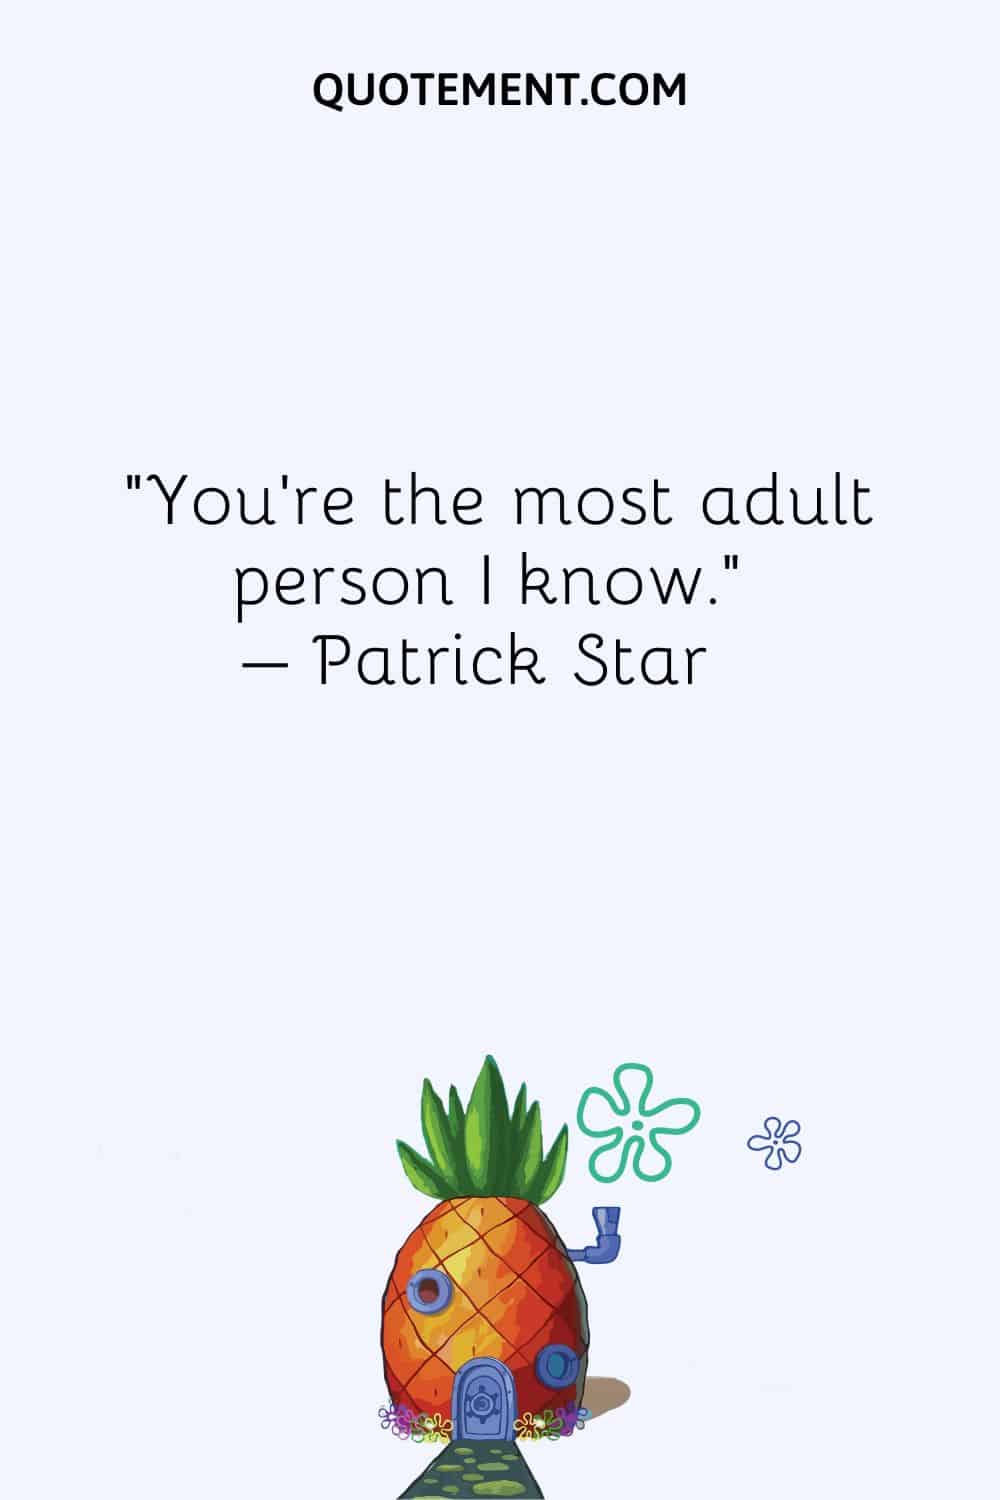 You're the most adult person I know. – Patrick Star